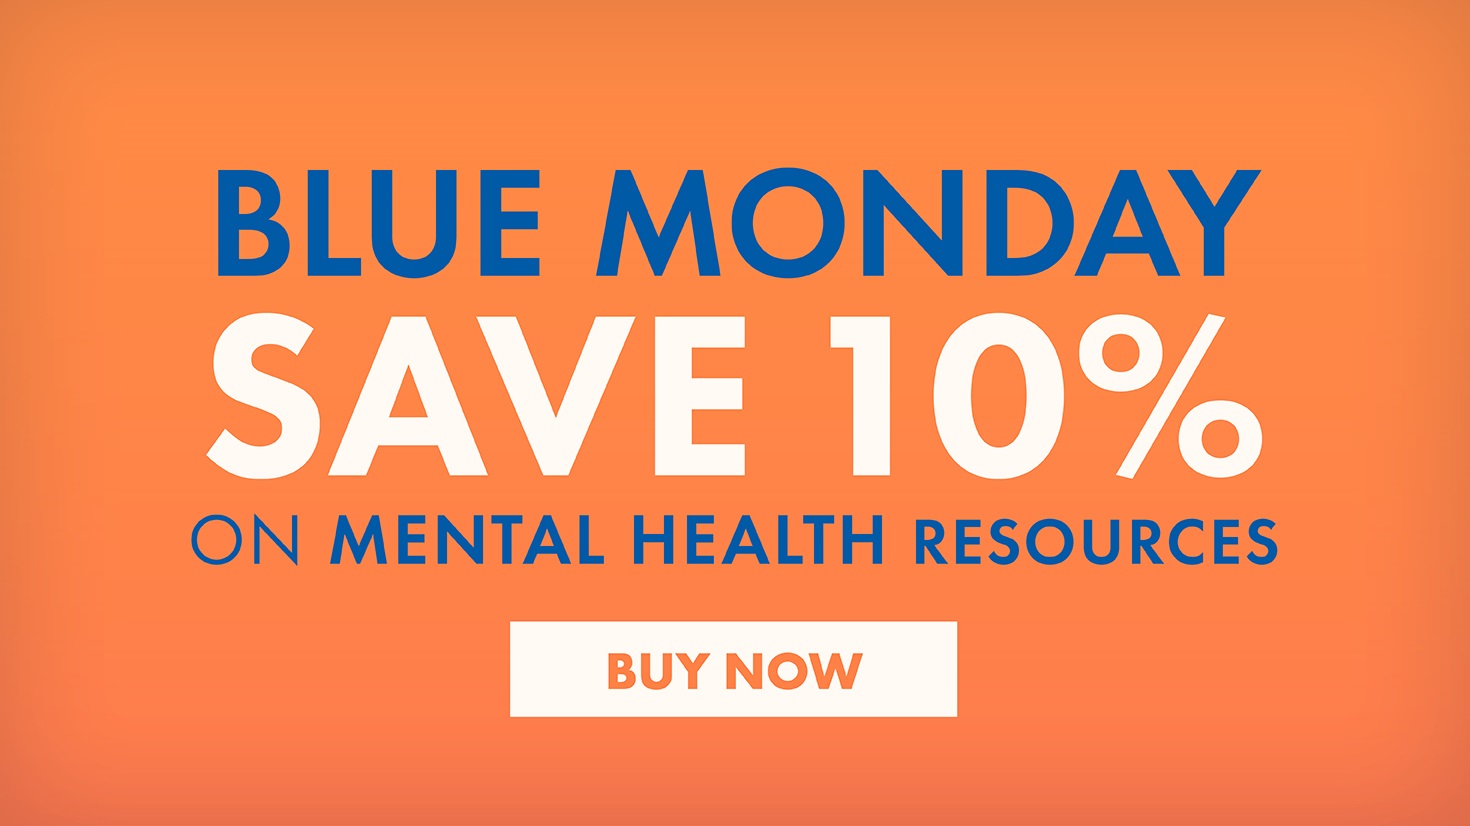 Blue Monday Week: Save 10% on Mental Health Resources